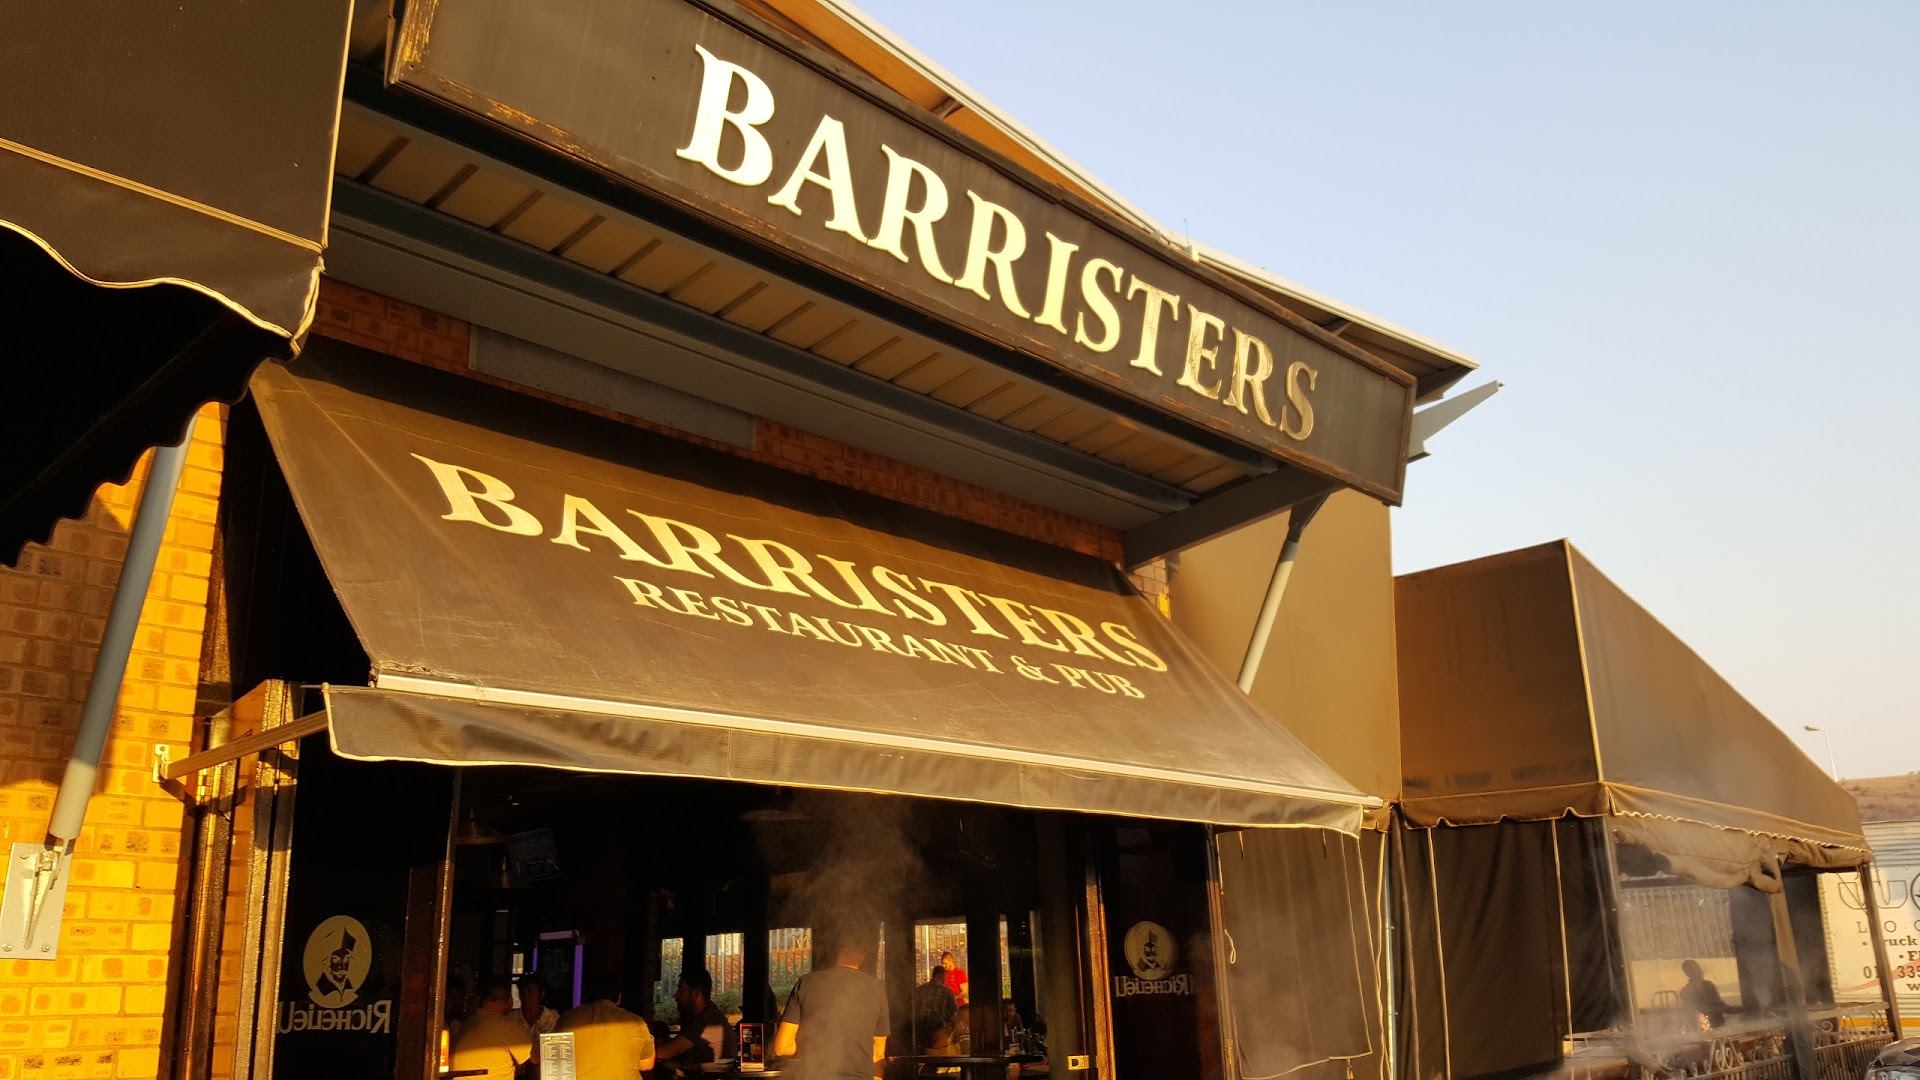 BARRISTERS RESTAURANT and PUB